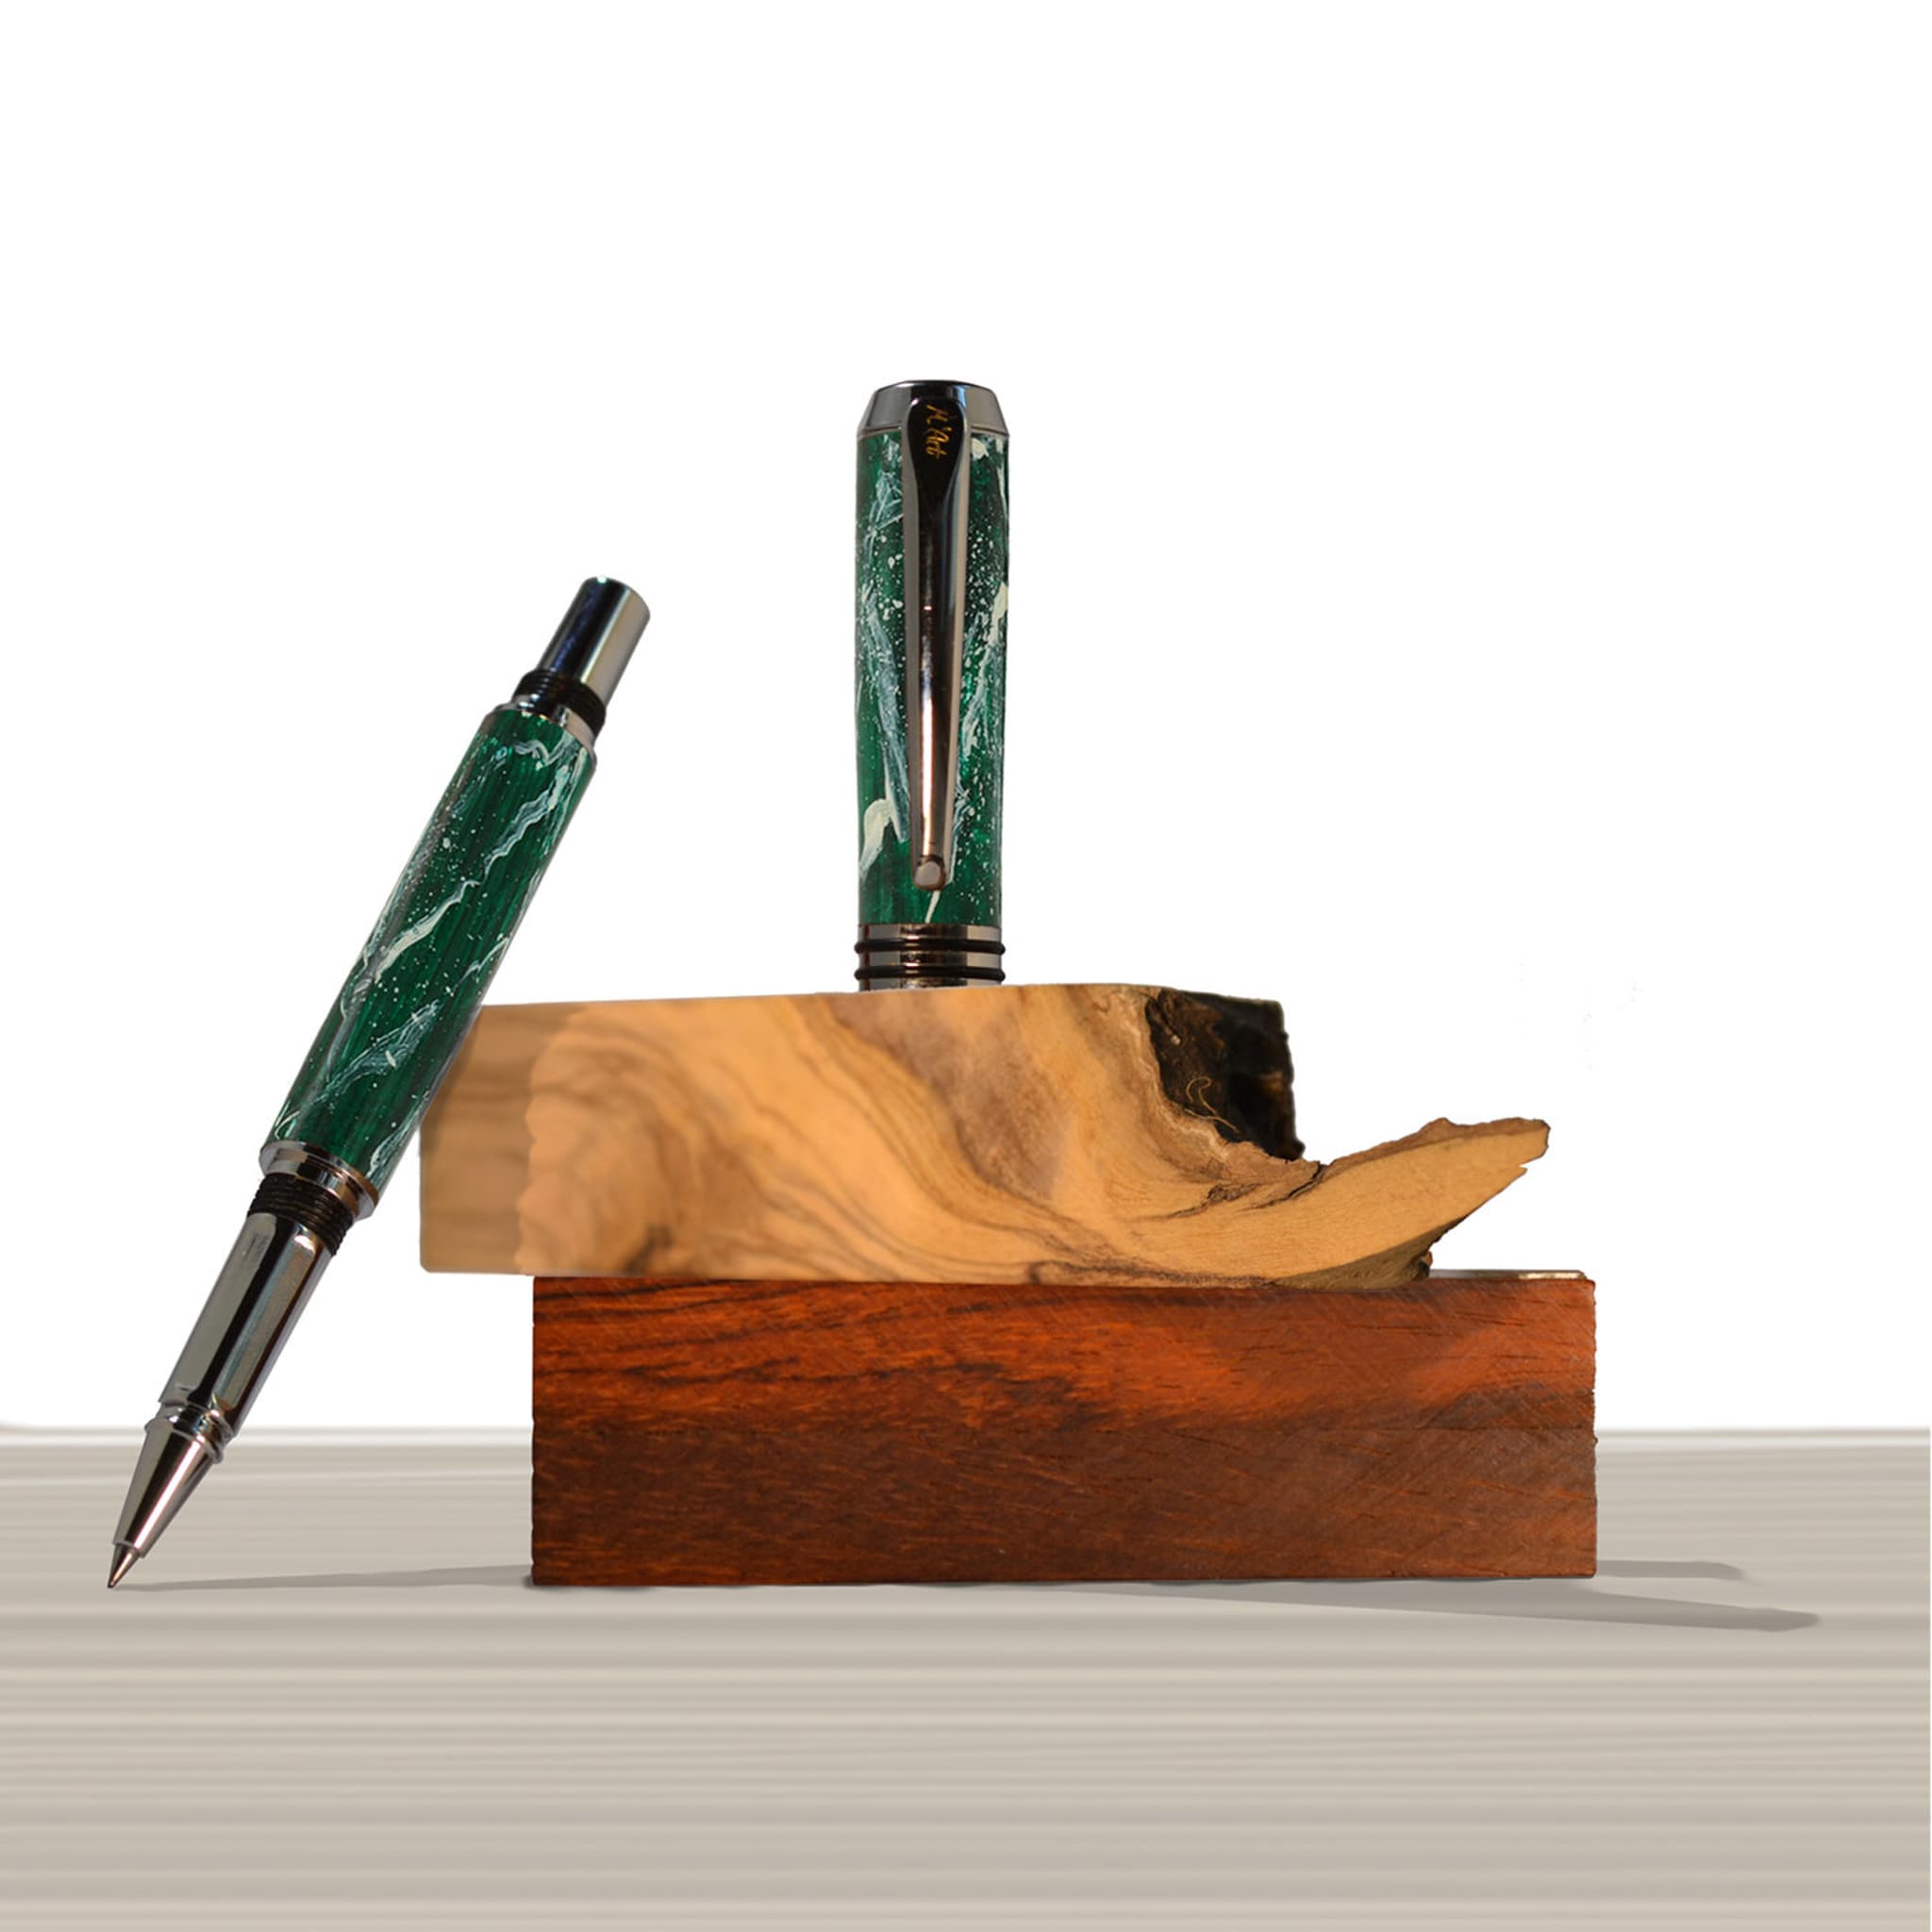 Artemisia Marbled Green Roller Pen in Olive Wood - Alternative view 3